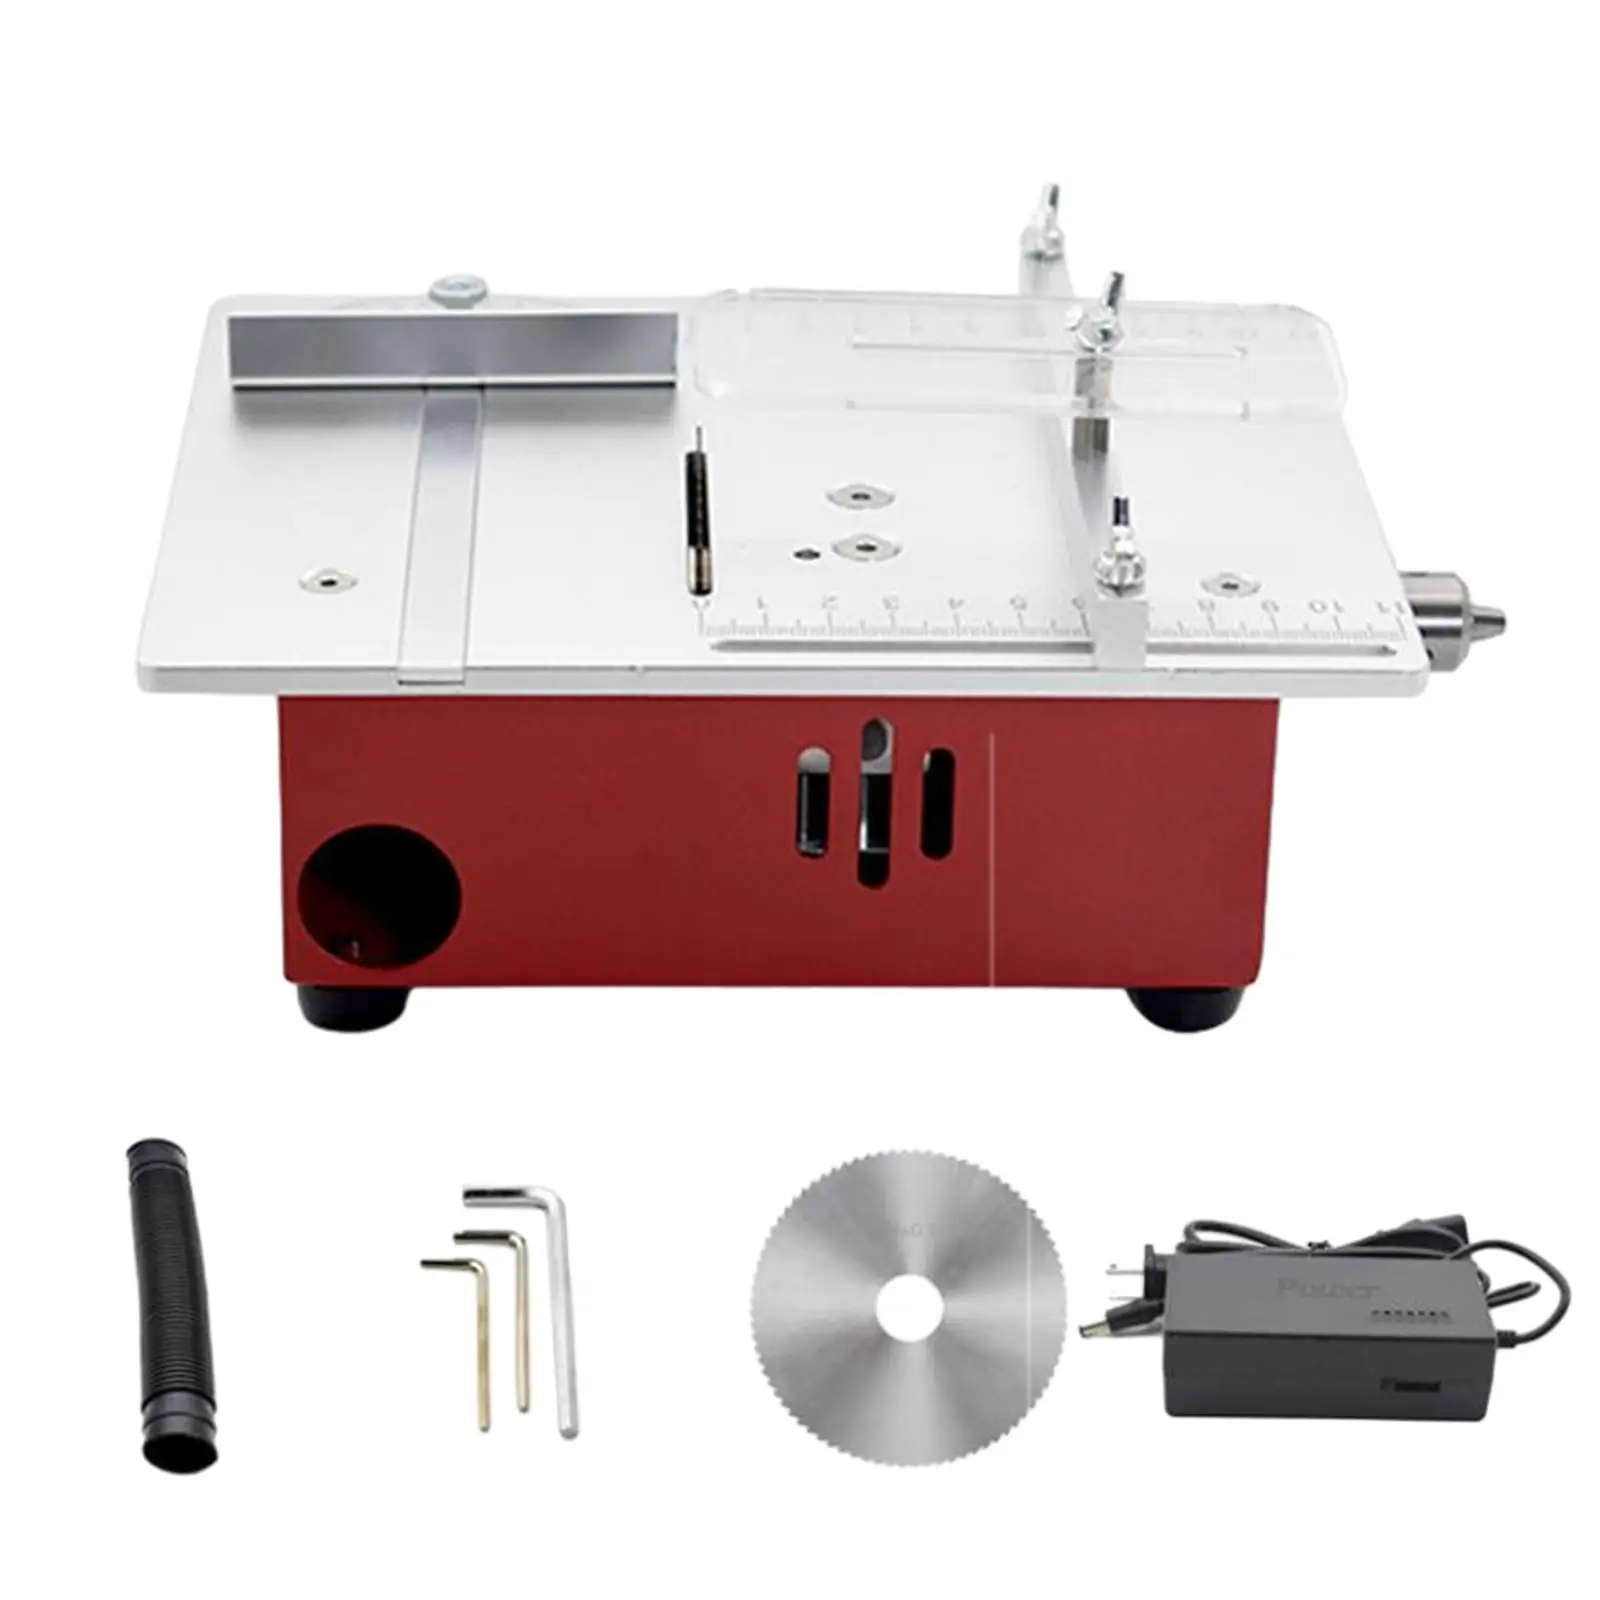 Mini Table Saw Liftable DIY Model Crafts Cutting Tool Hobby Table Saw for Plastic Wood Acrylic Cutting Miniature Wood Crafts